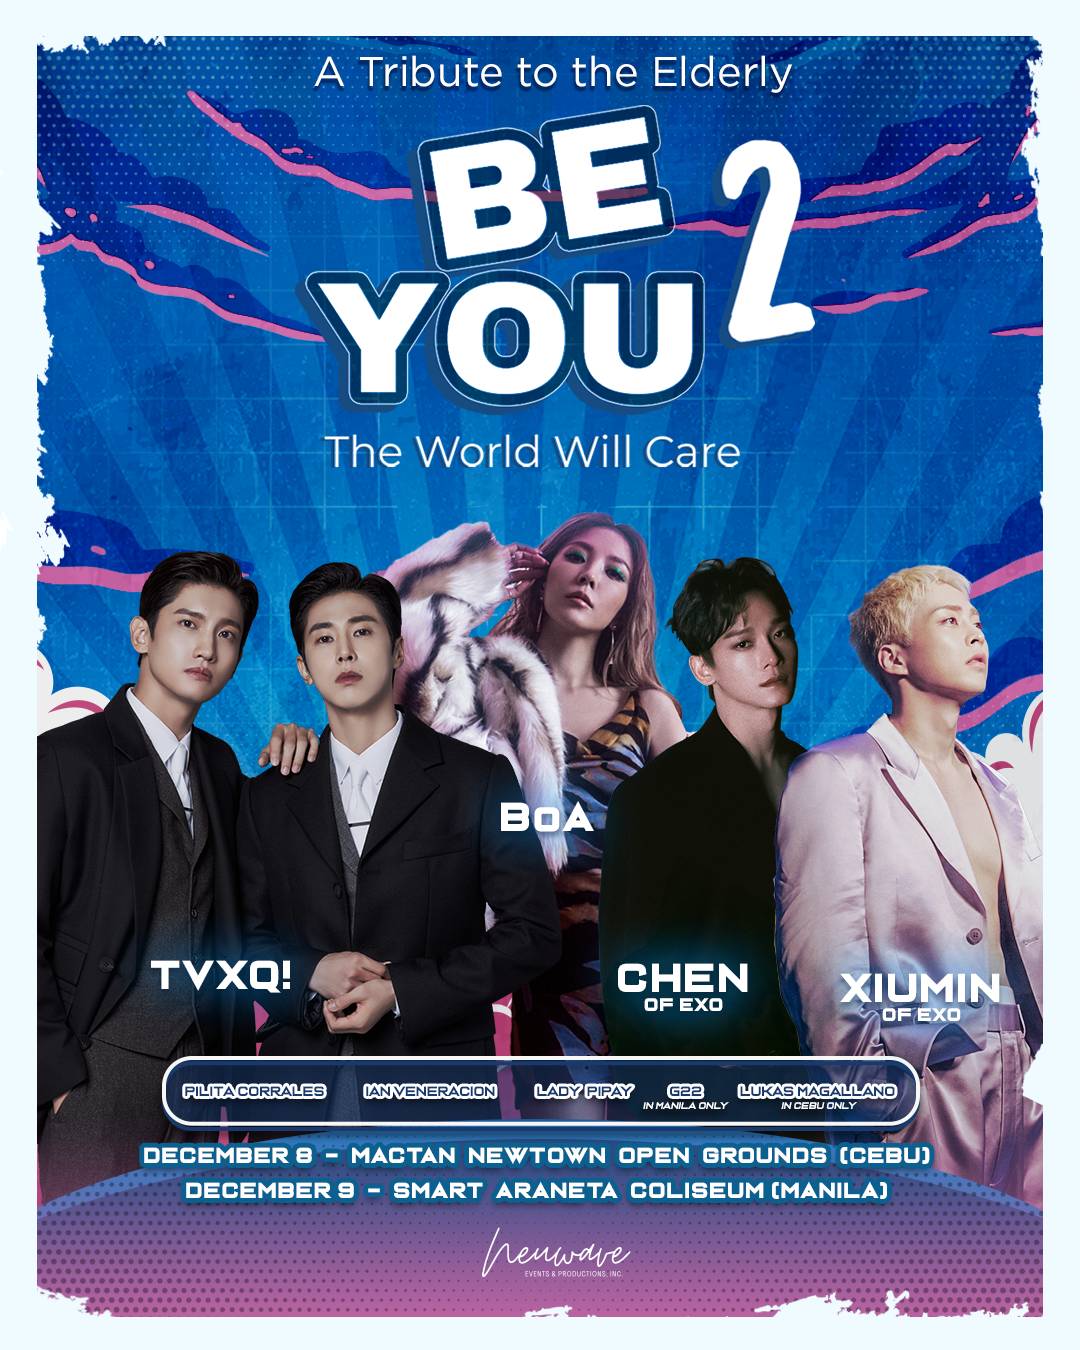 BoA, TVXQ, EXO's Chen and Xiumin Are Coming To The Philippines For A 2-Day Concert